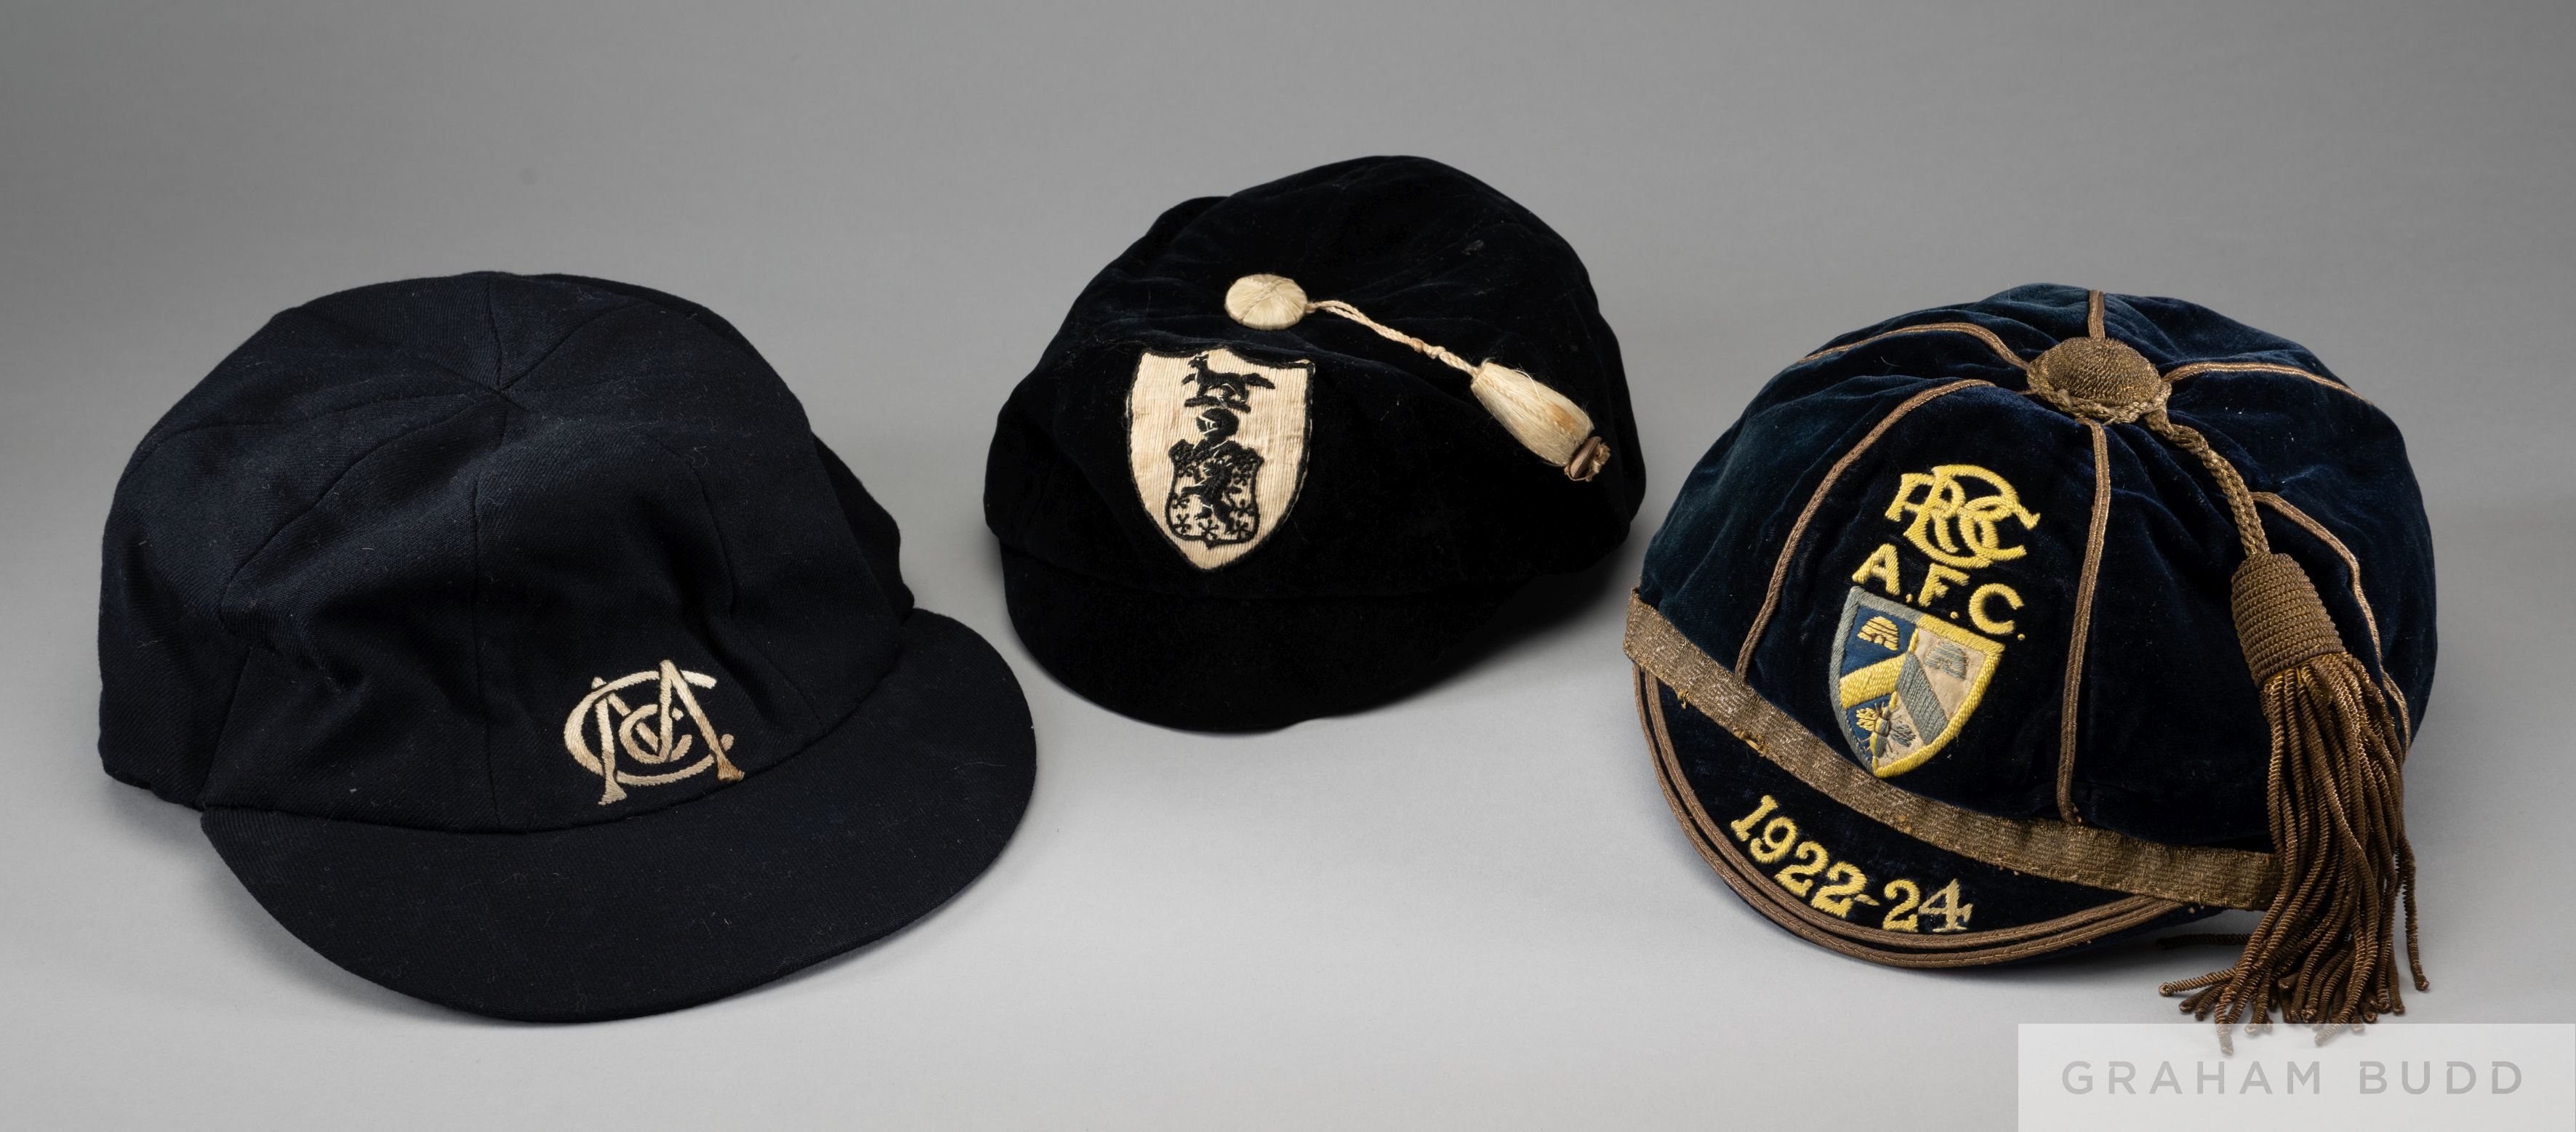 Two representative caps, one dated 1922-24 and MCC cap